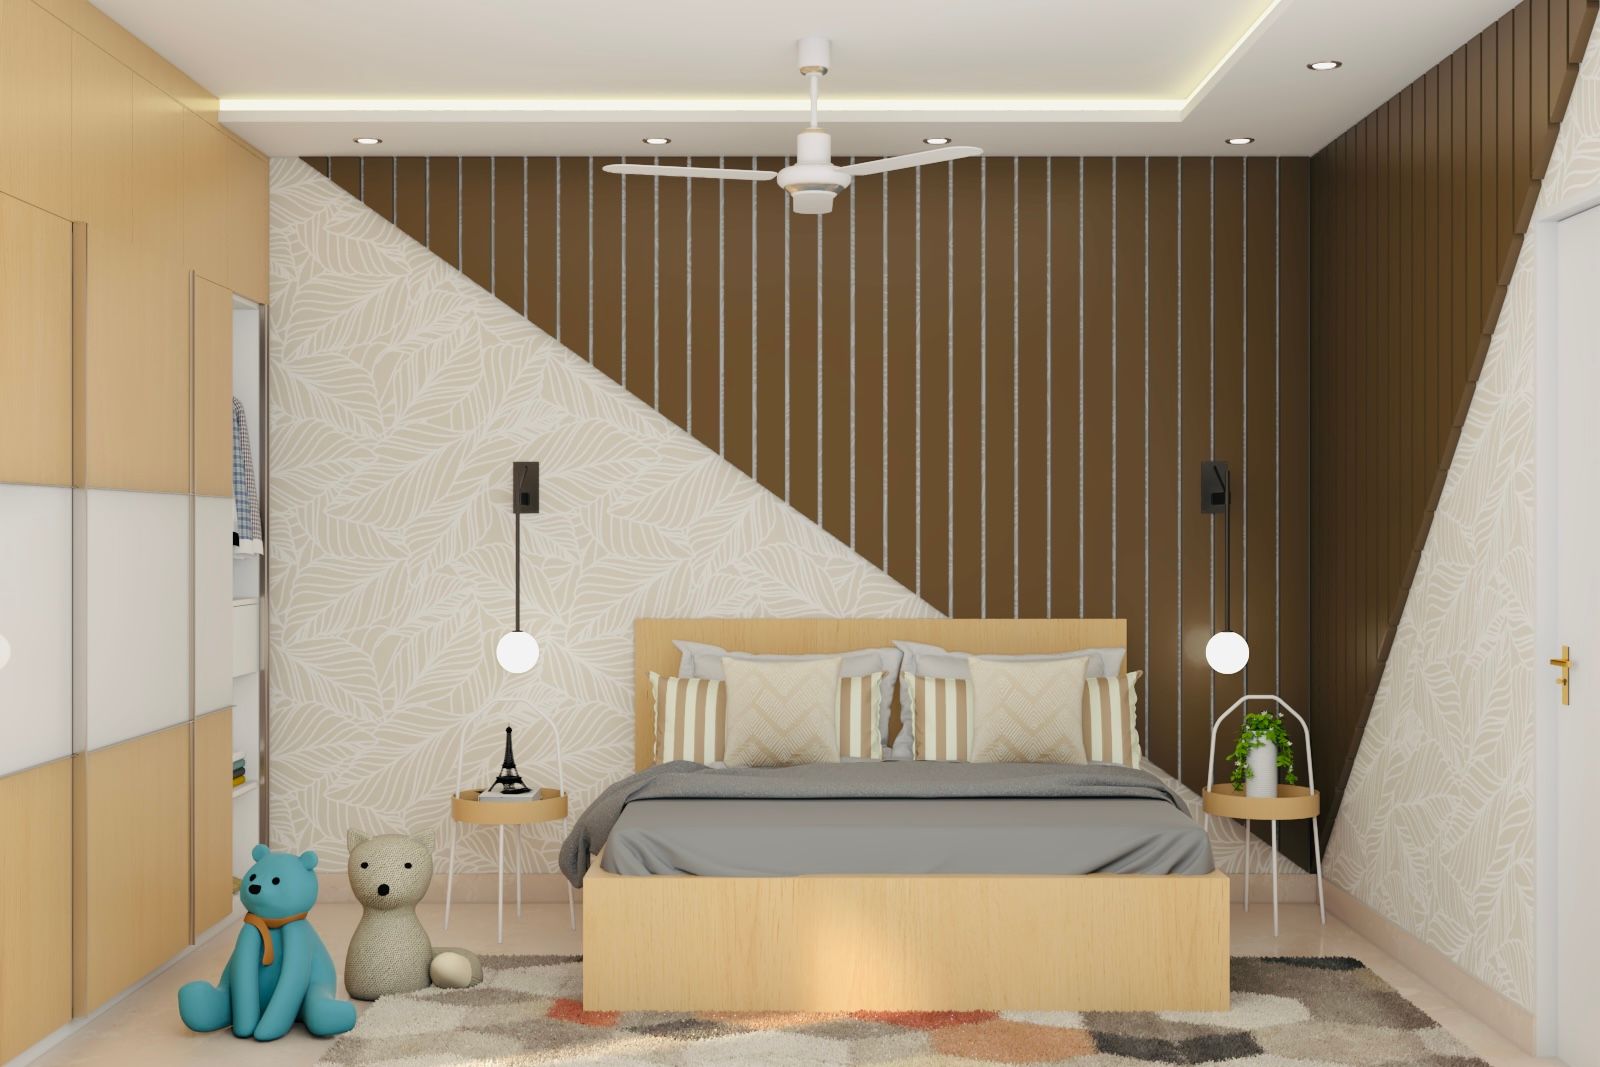 Contemporary Kids Bedroom Design With A King Size Bed And Sliding Wardrobe